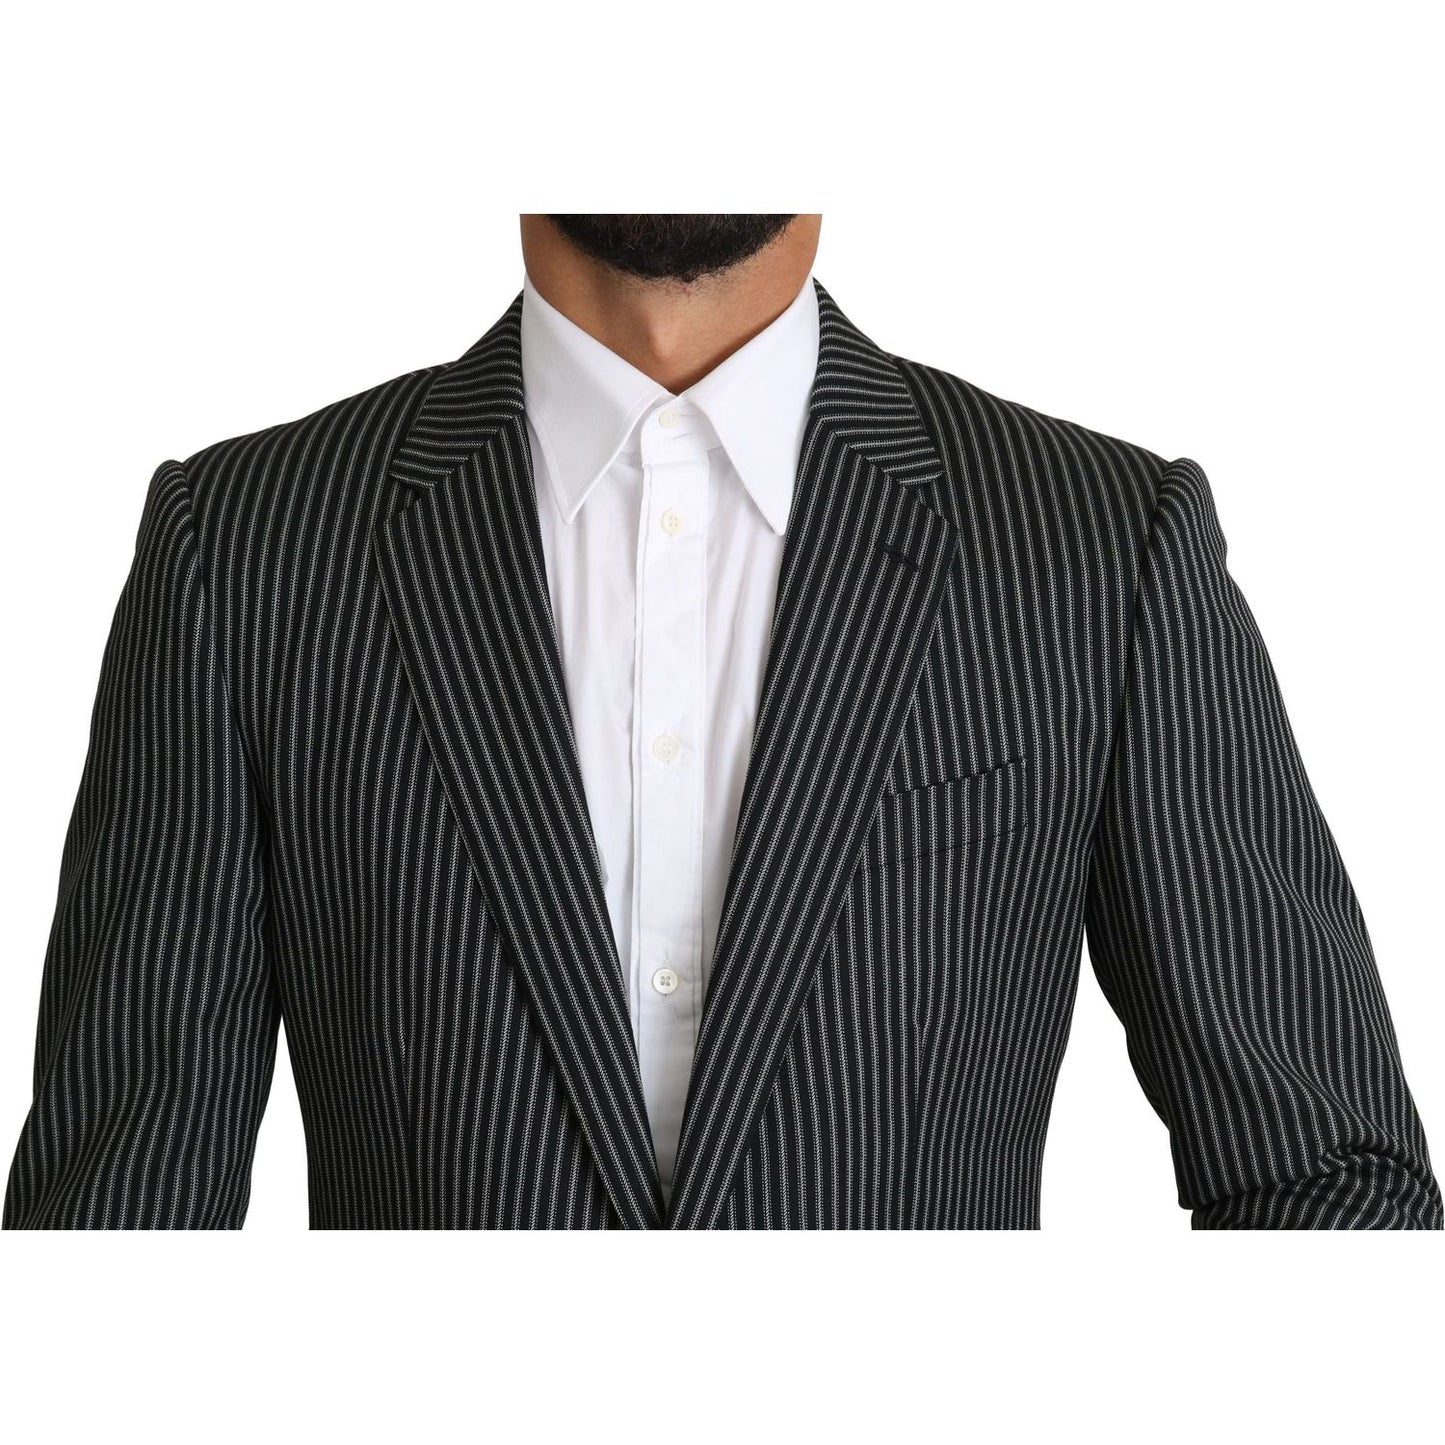 Dolce & Gabbana Elegant Striped Wool-Silk Two-Piece Suit black-white-stripes-2-piece-martini-suit Suit IMG_0375-scaled-954d4cd0-124.jpg